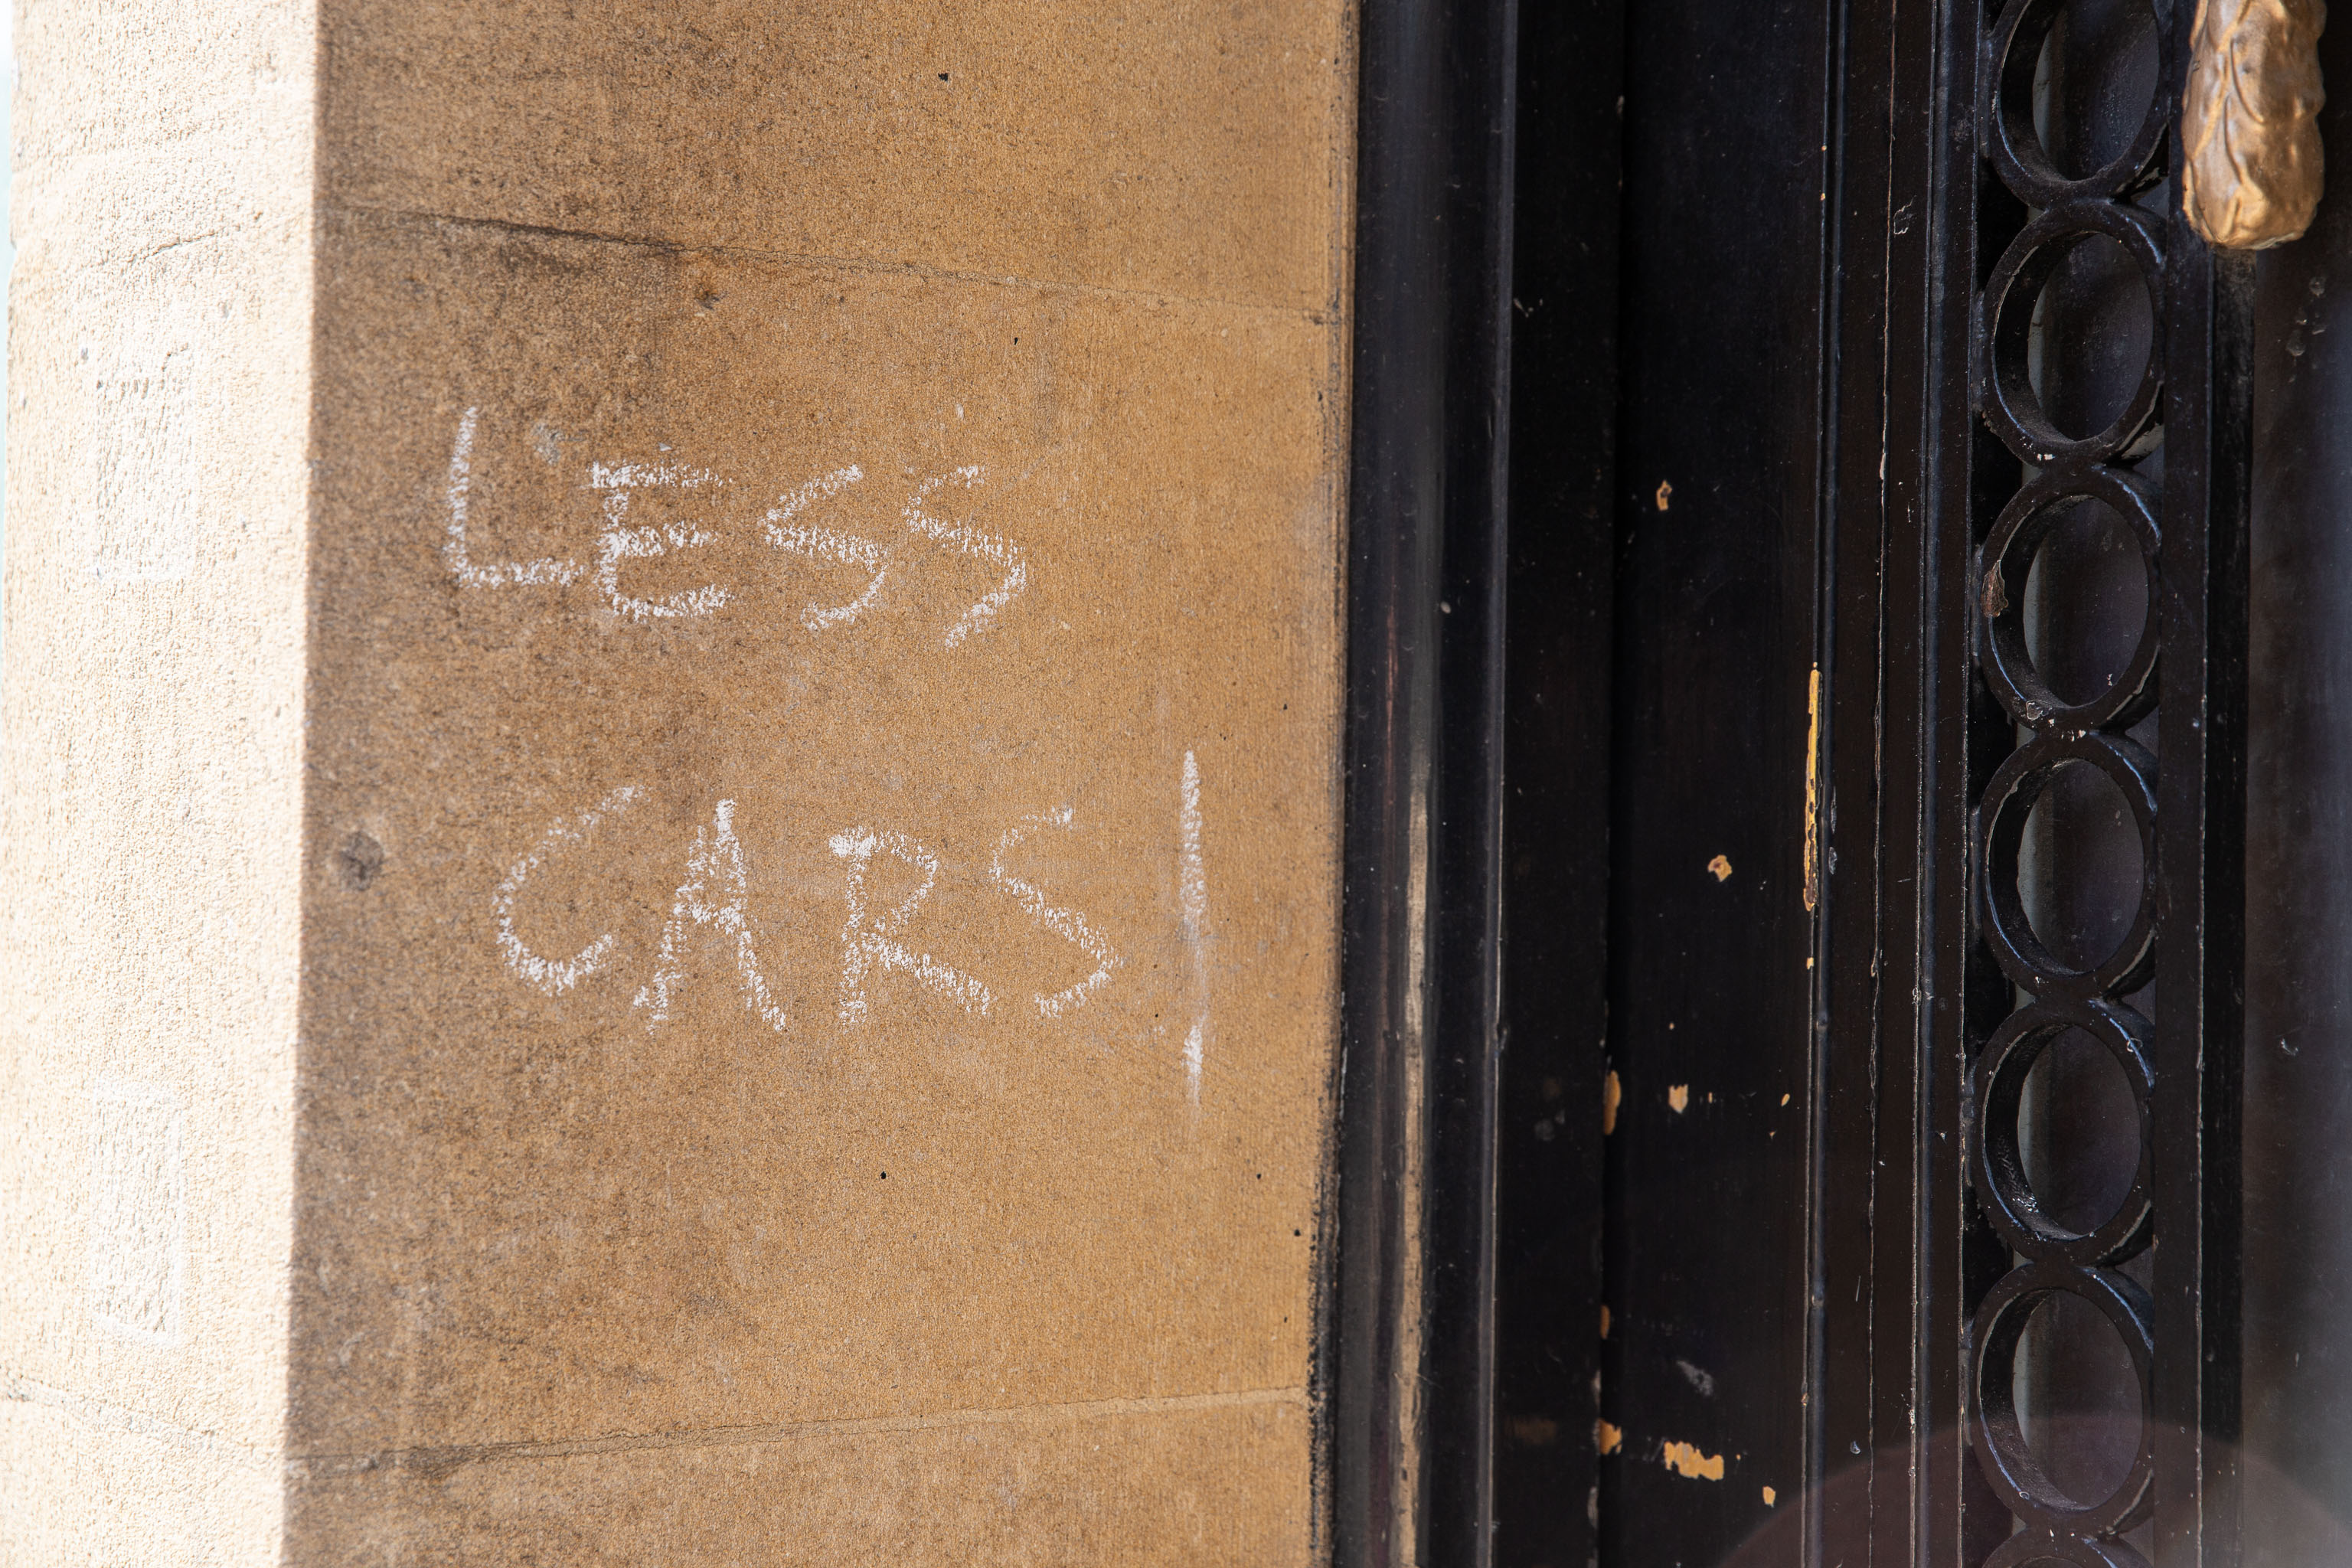 LESS CARS
If I'd had any chalk with me I'd've changed it to "FEWER"...
